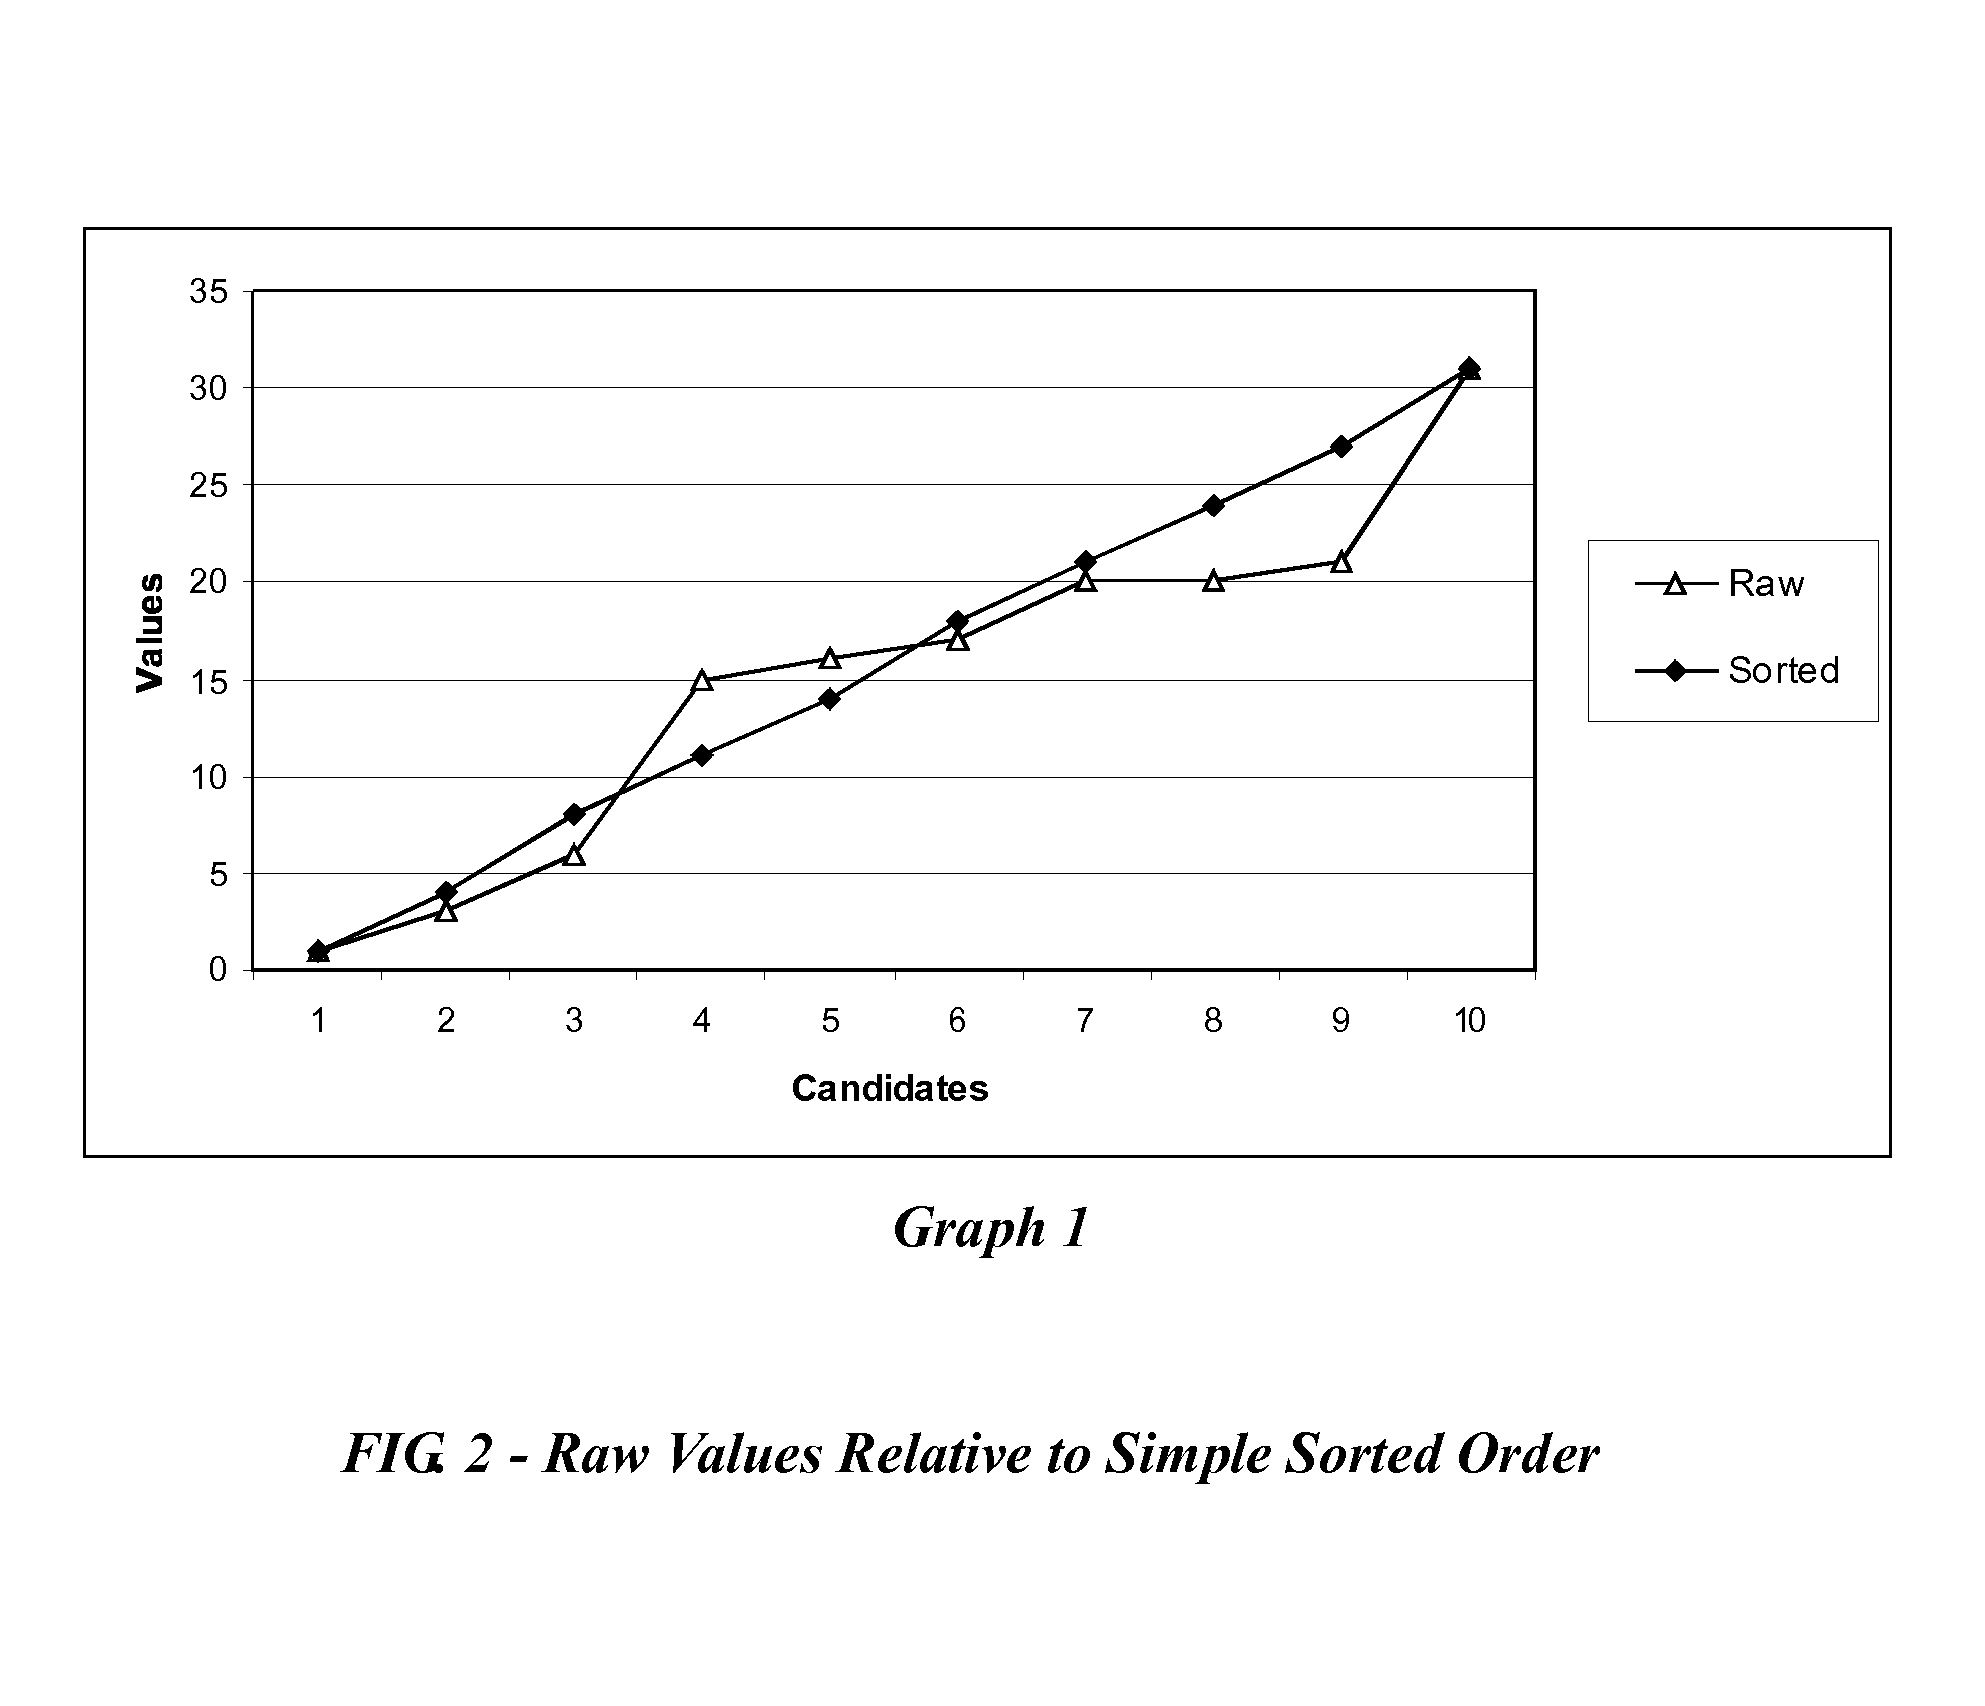 Method for making optimal selections based on multiple objective and subjective criteria